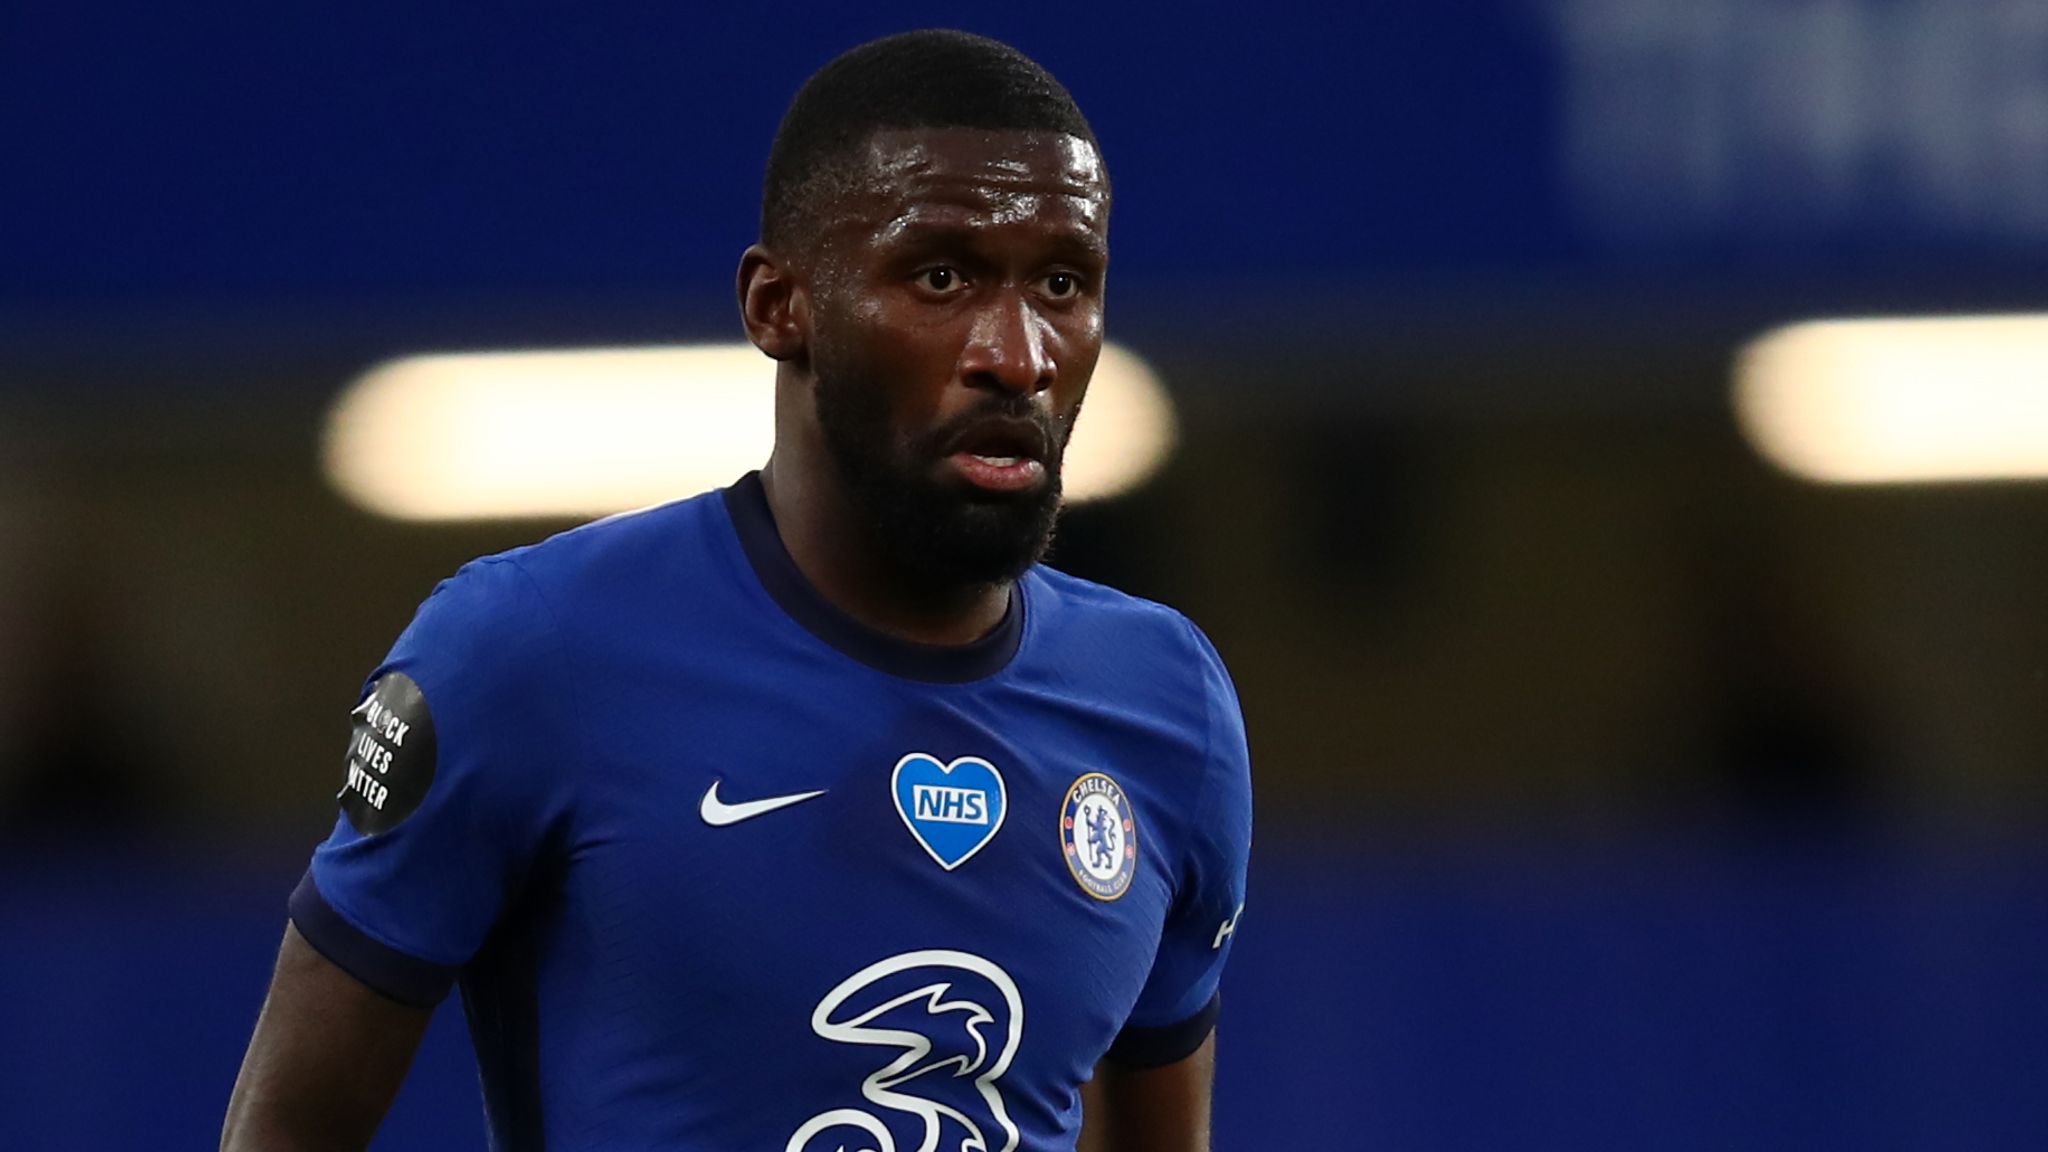 Antonio Rudiger: Chelsea defender back in contention after positive talks with Frank Lampard